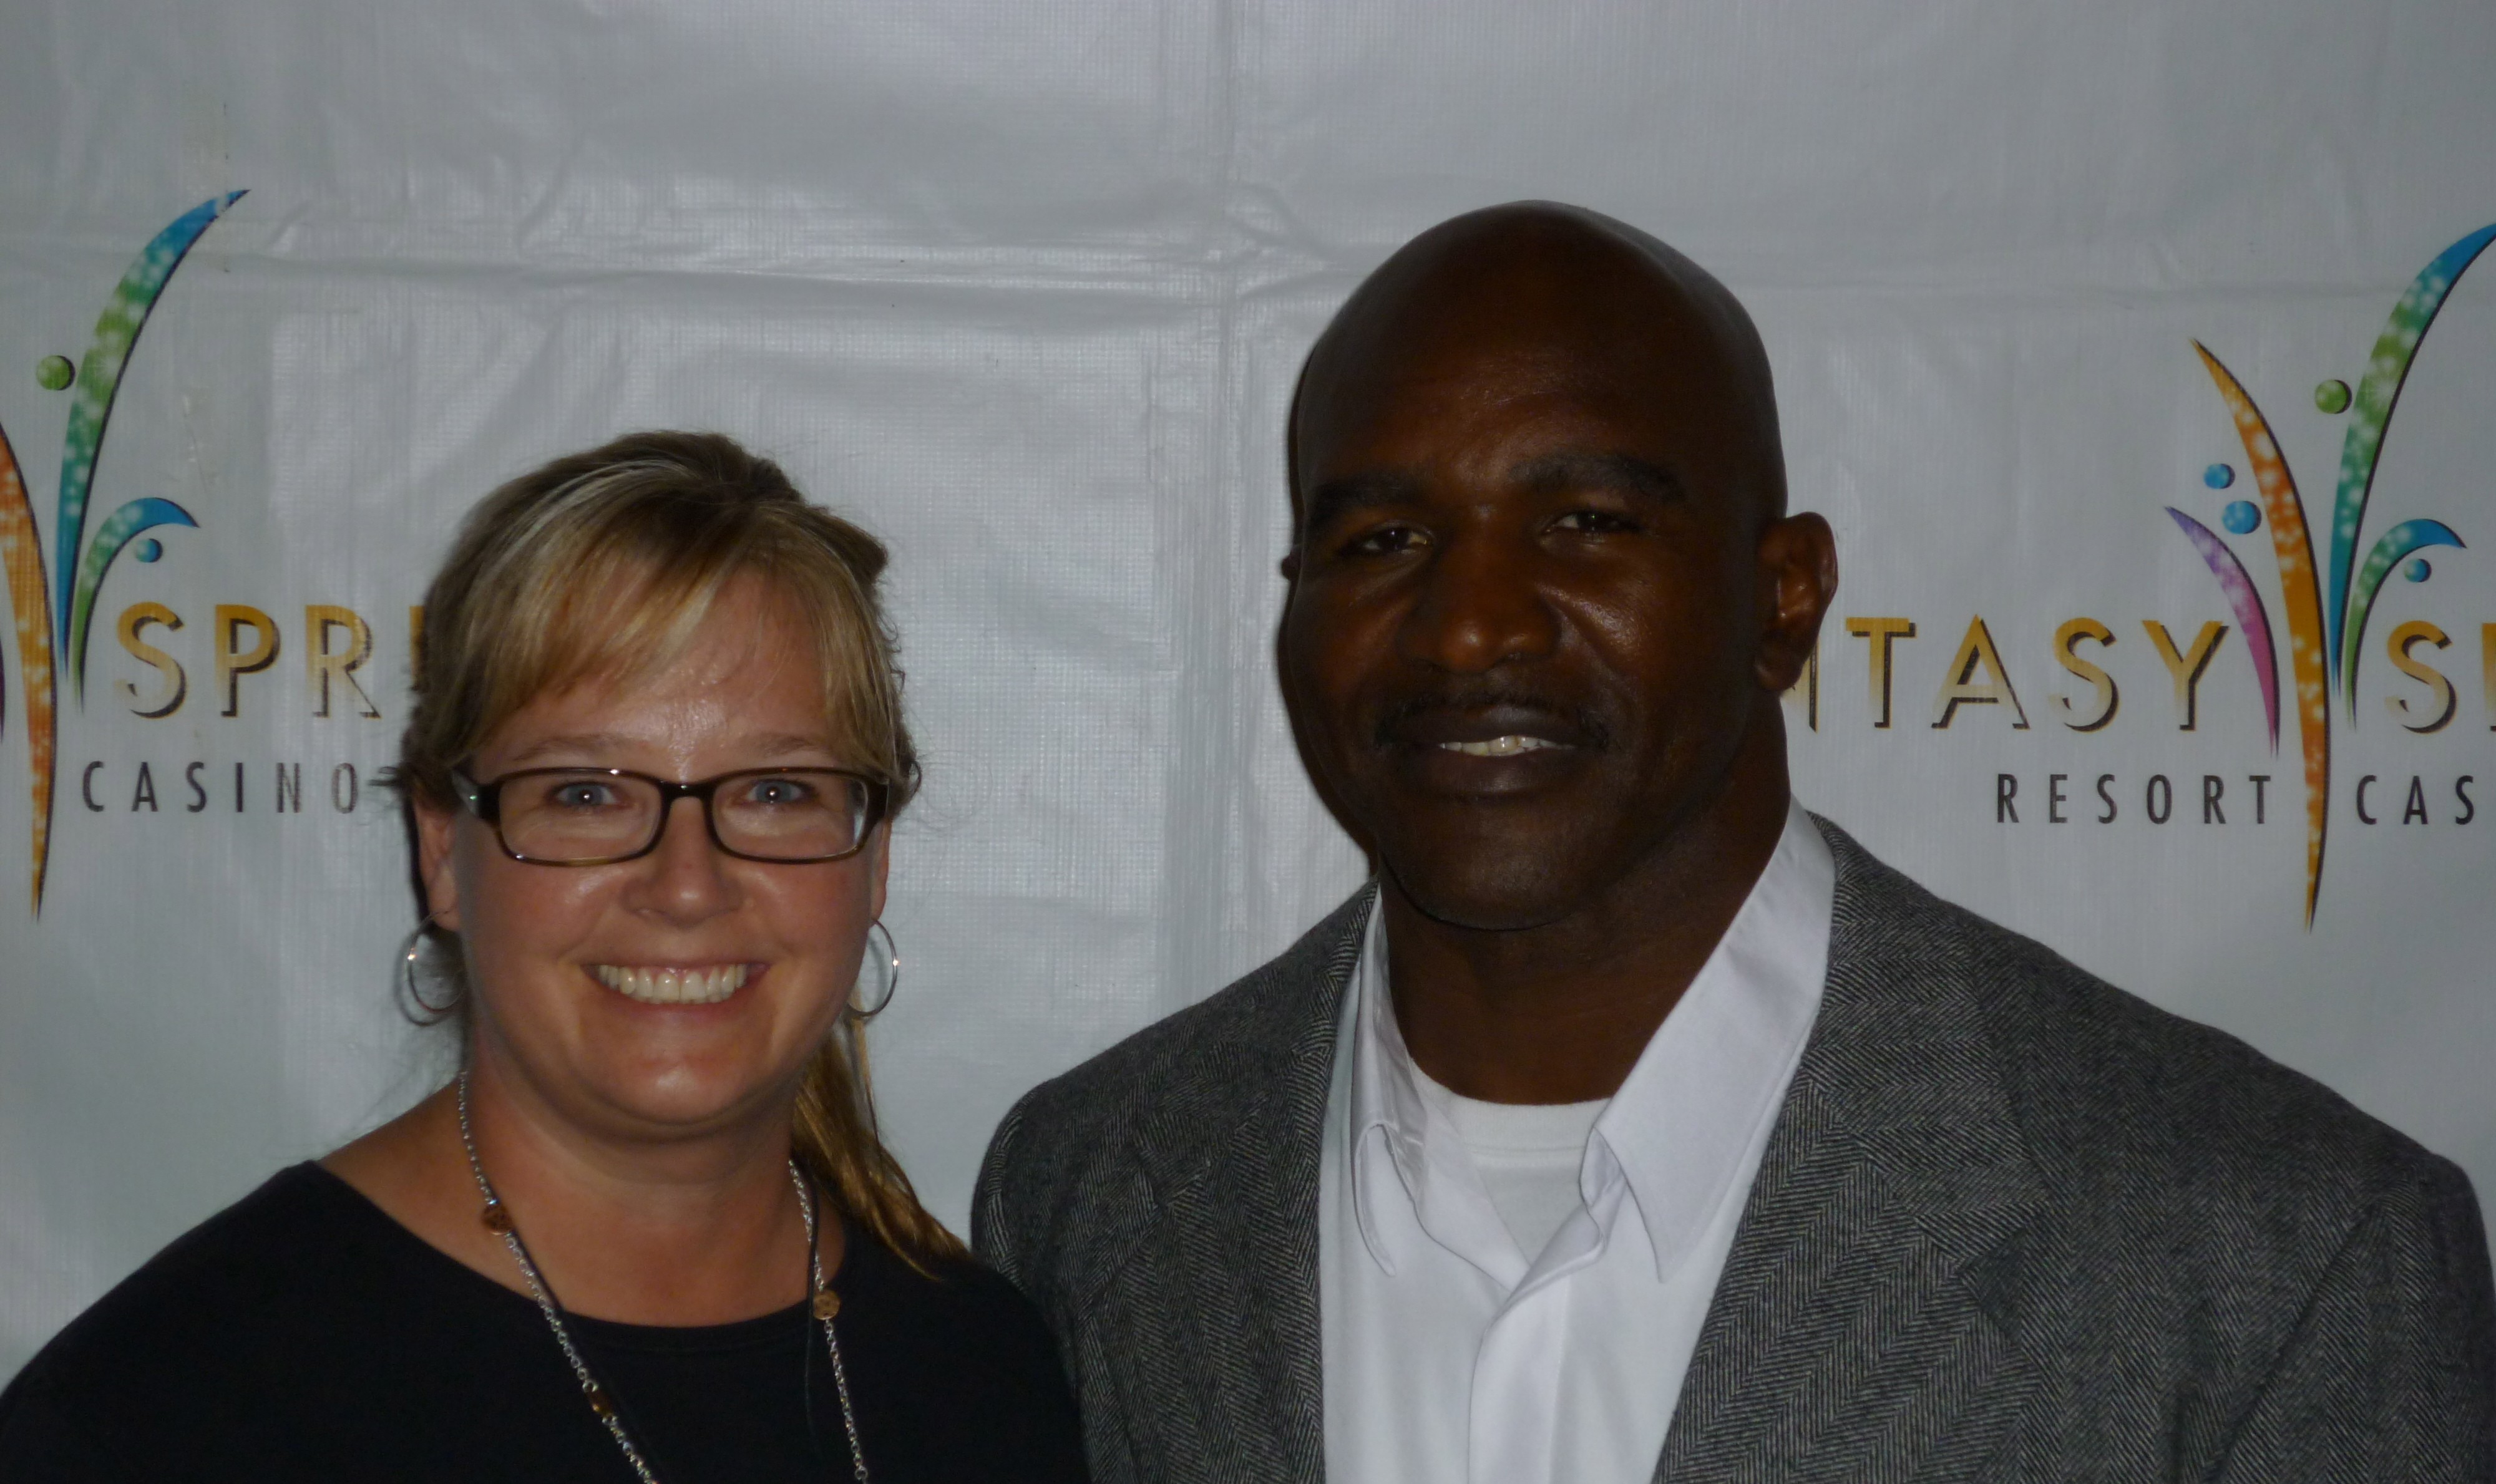 Me and Evander Holyfield?  Yeah, we’re tight!